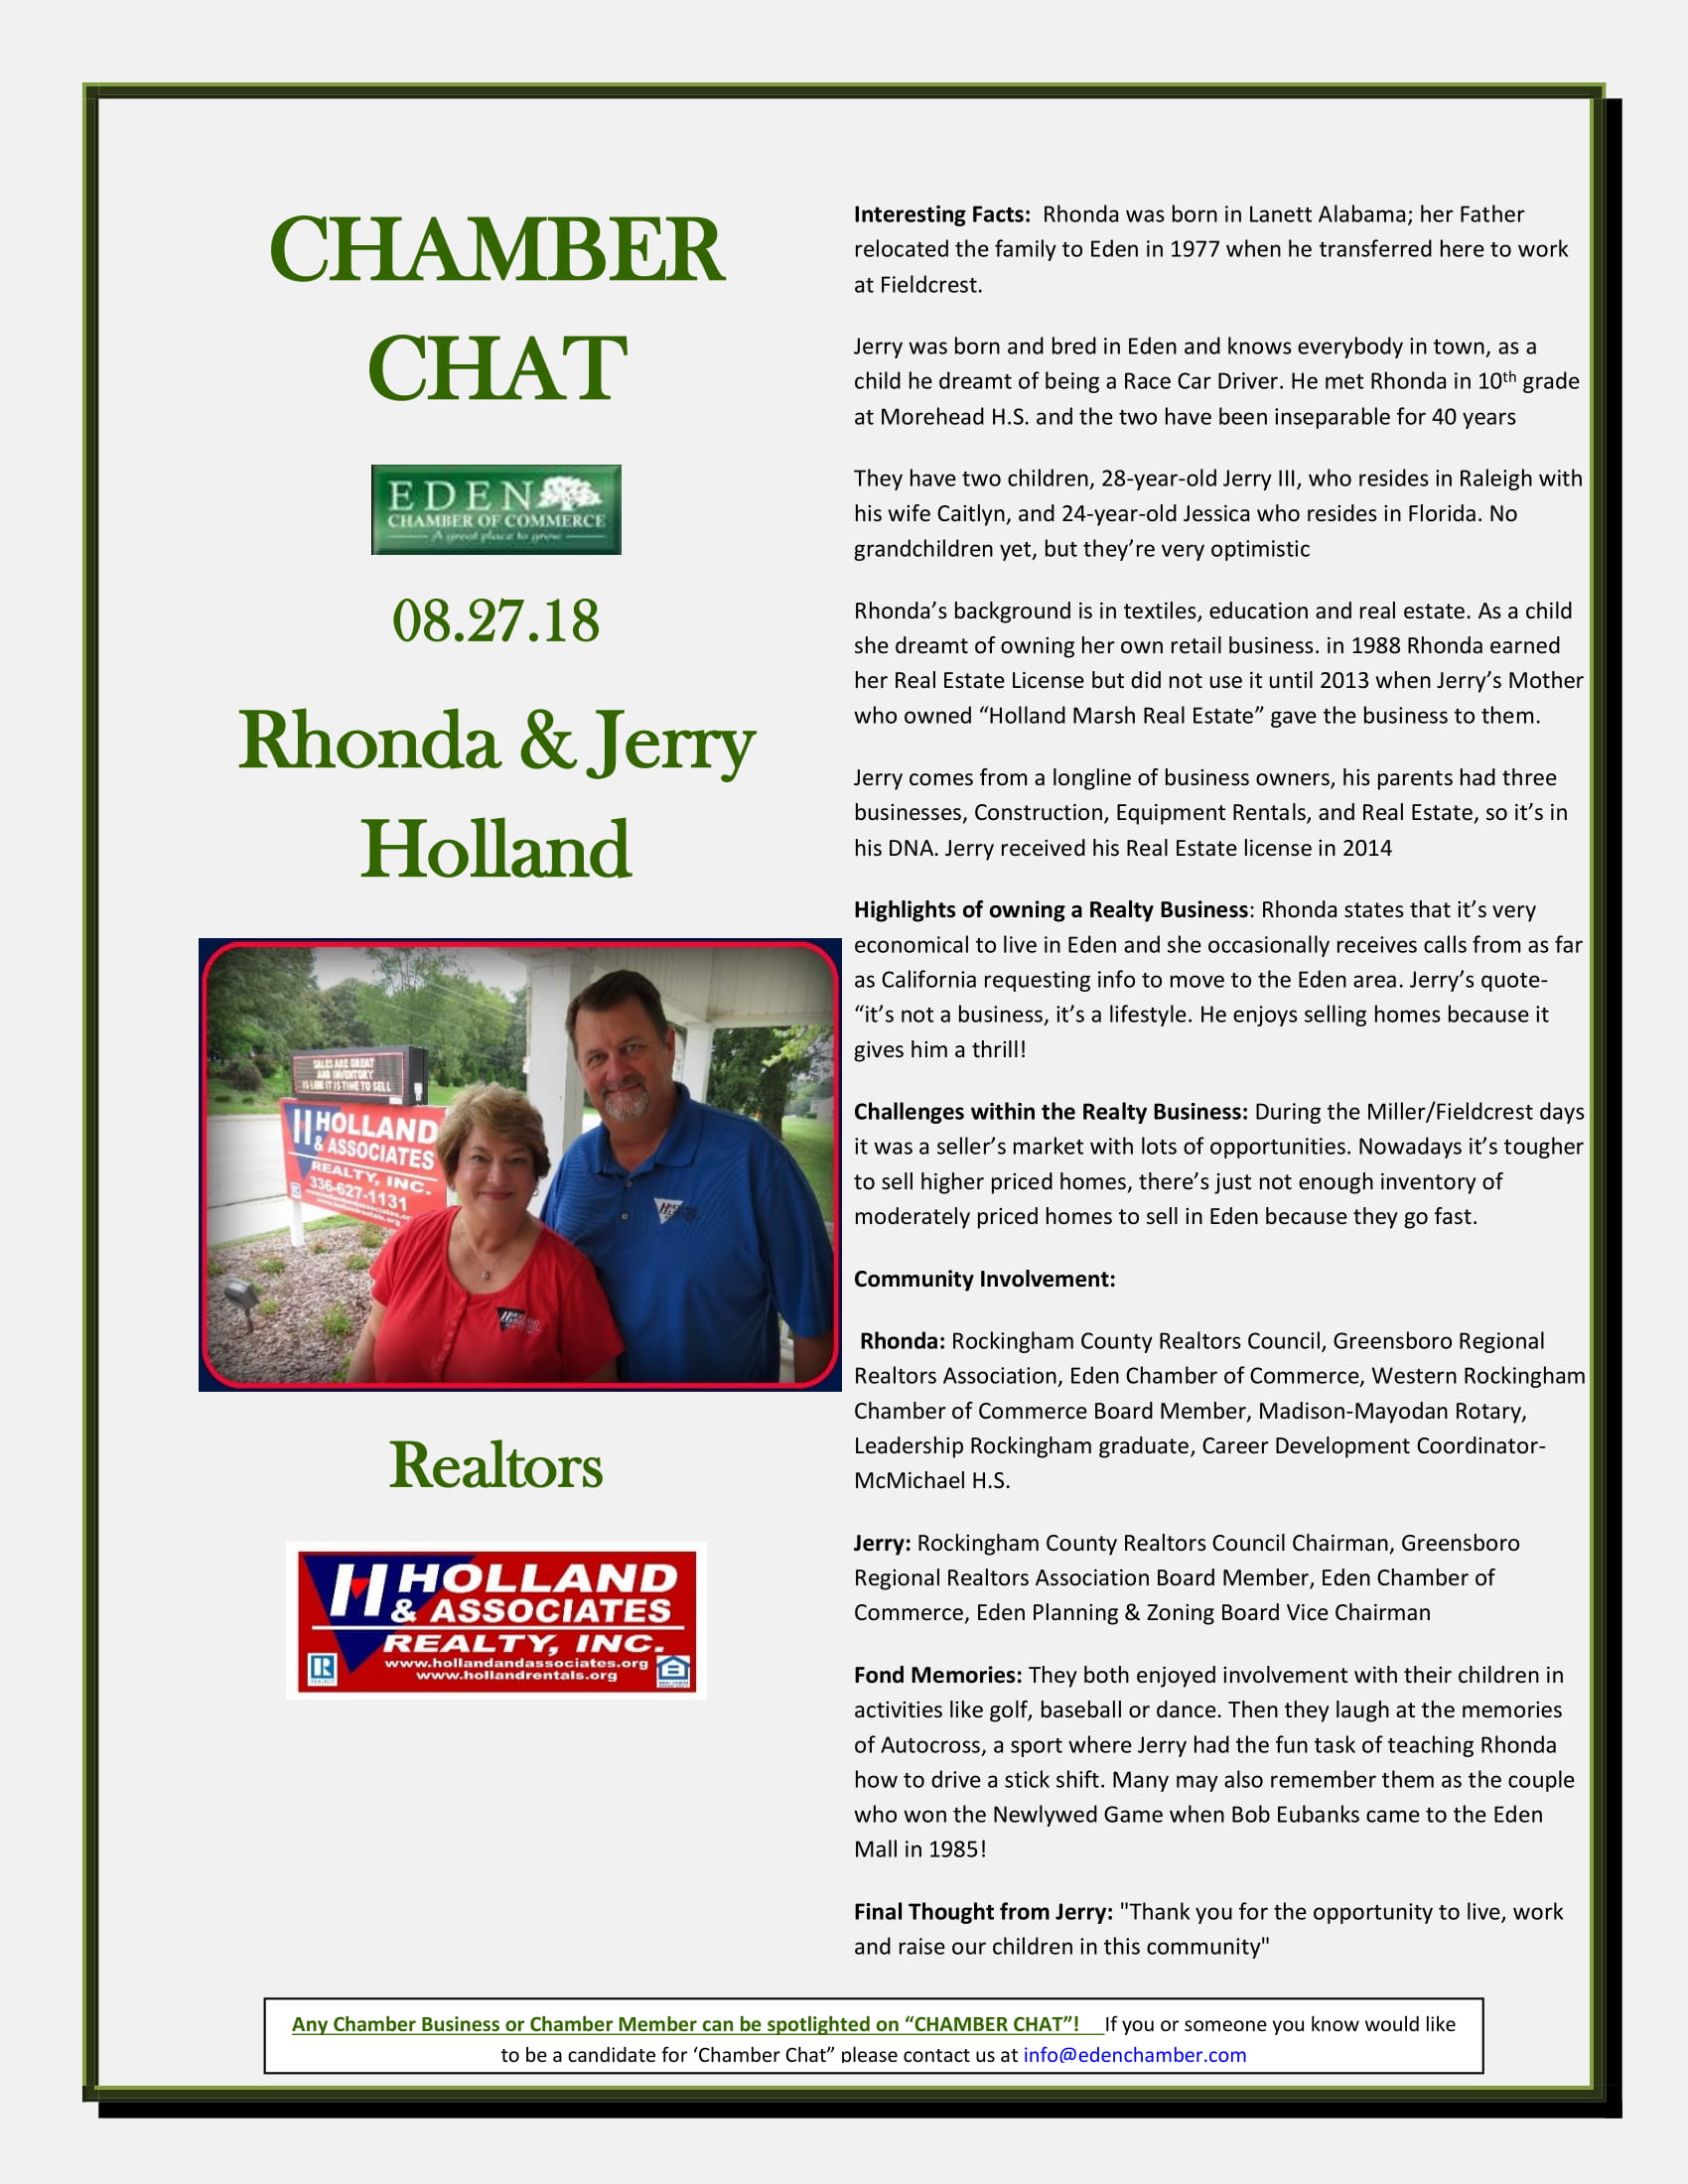 CHAMBER-CHAT--Holland-Realty--Rhonda-and-Jerry-08.27.18-1